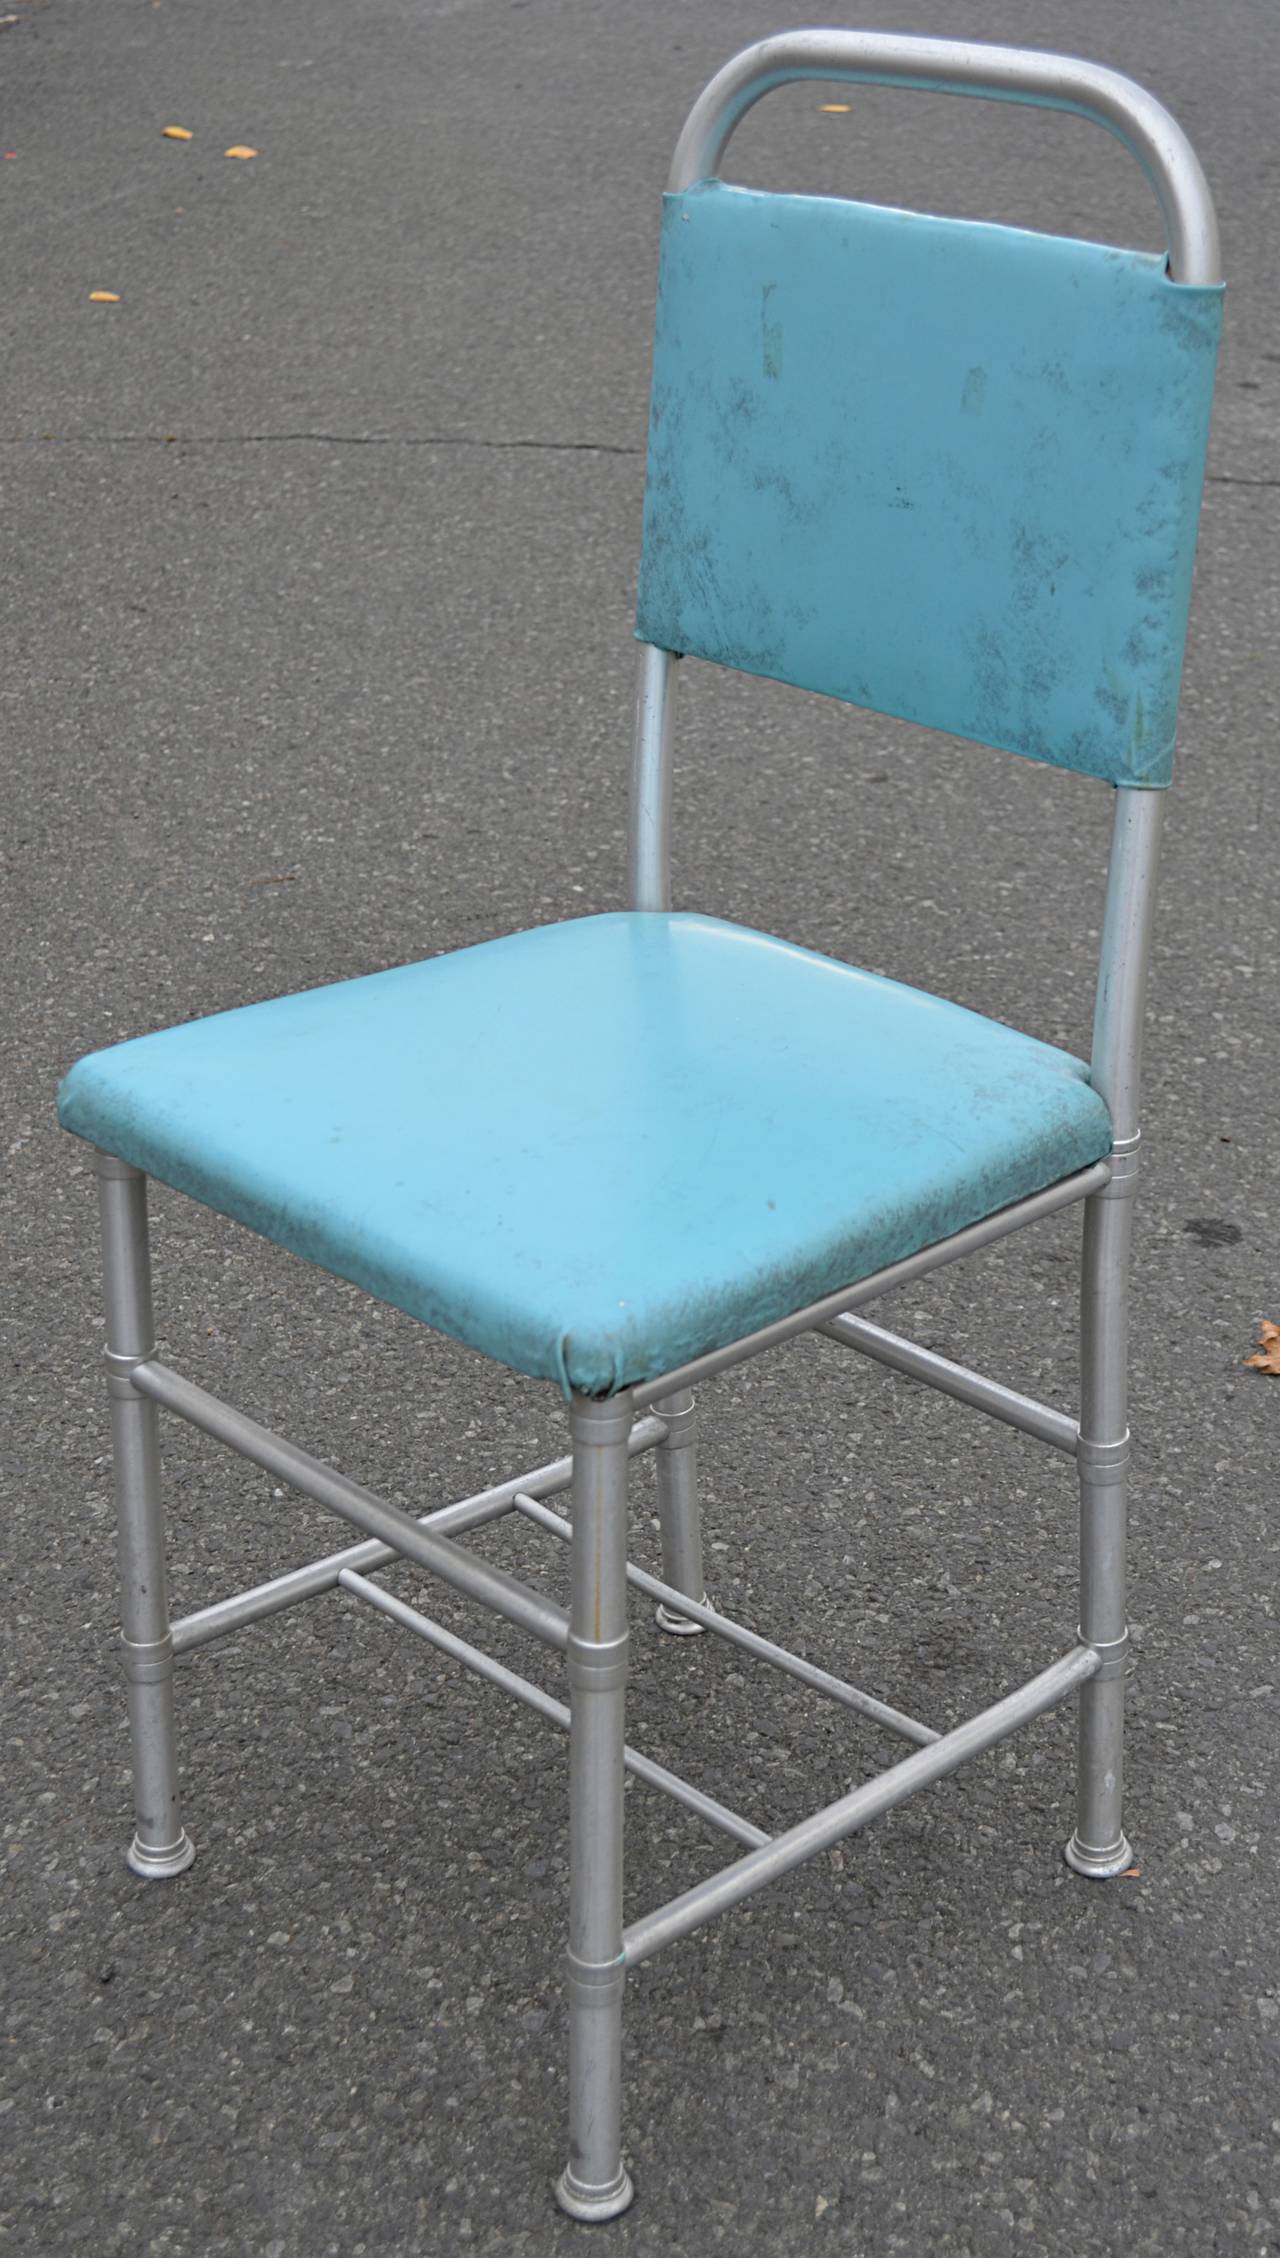 Classic Warren McArthur aluminum desk or occasional chair in original robbin's egg blue vinyl. Vinyl shows signs of age. Recovering in COM available.